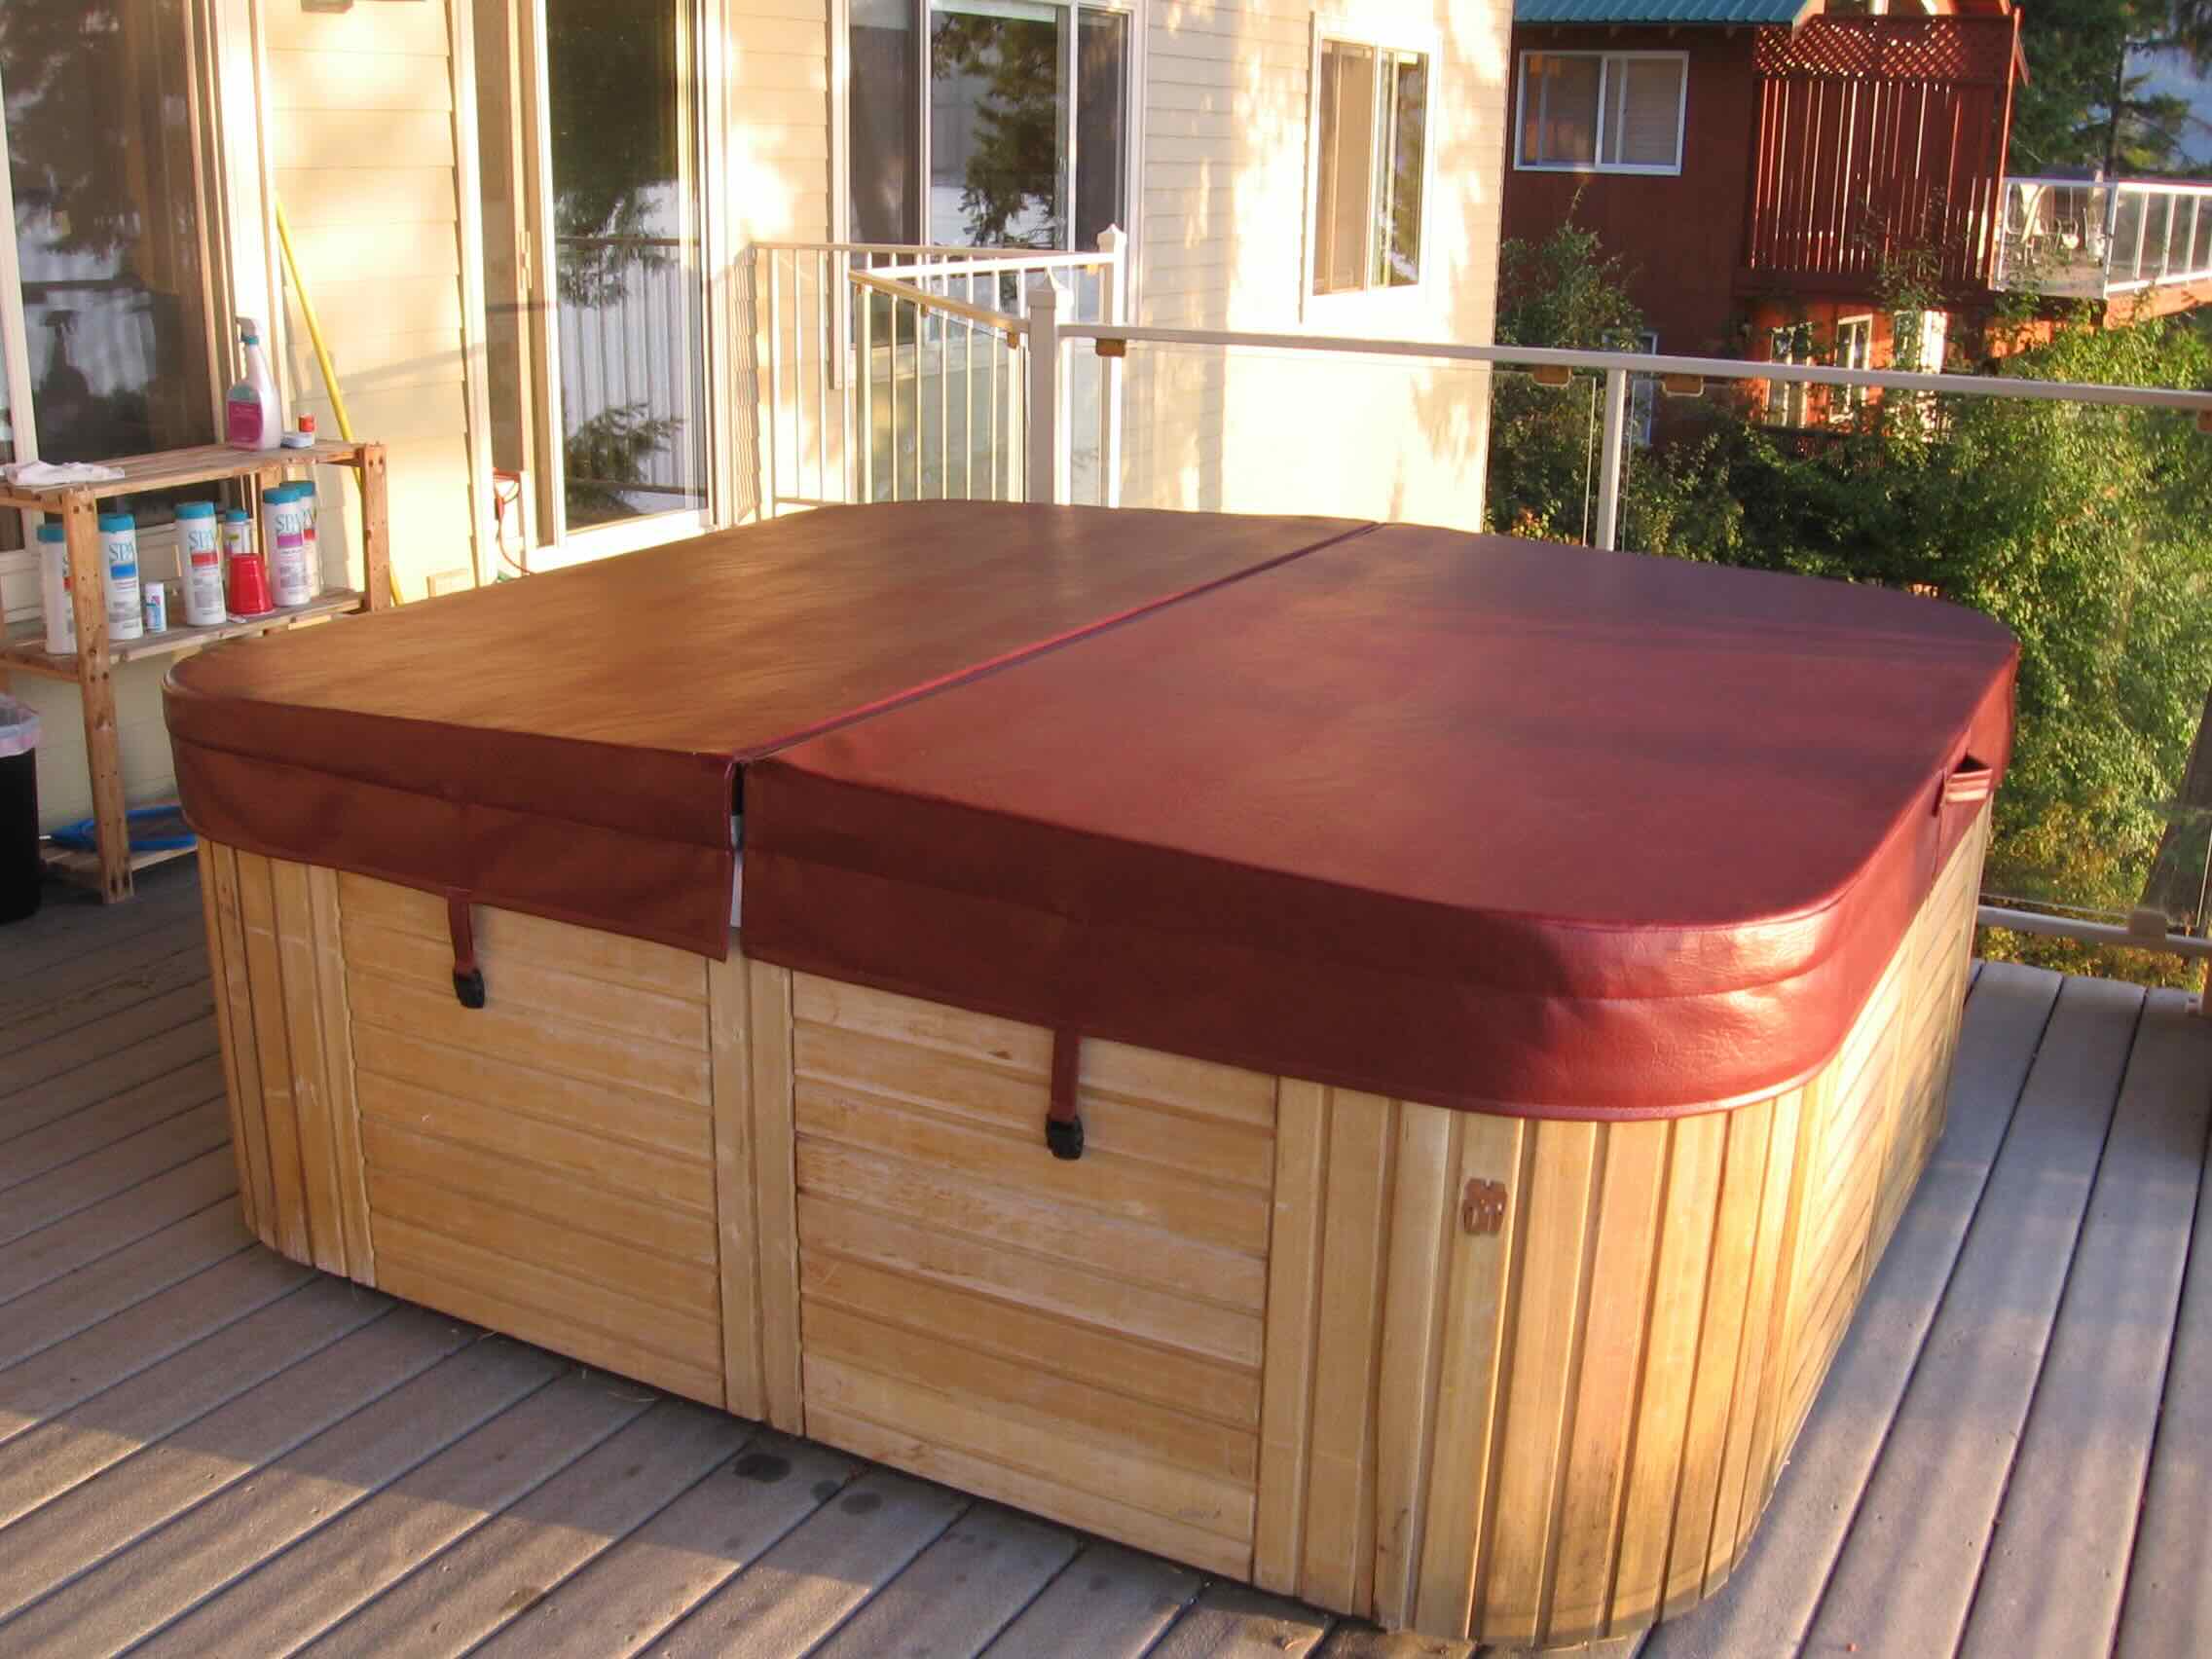 11 Amazing Hot Tub Covers 84 X 84 For 2023 1702256869 